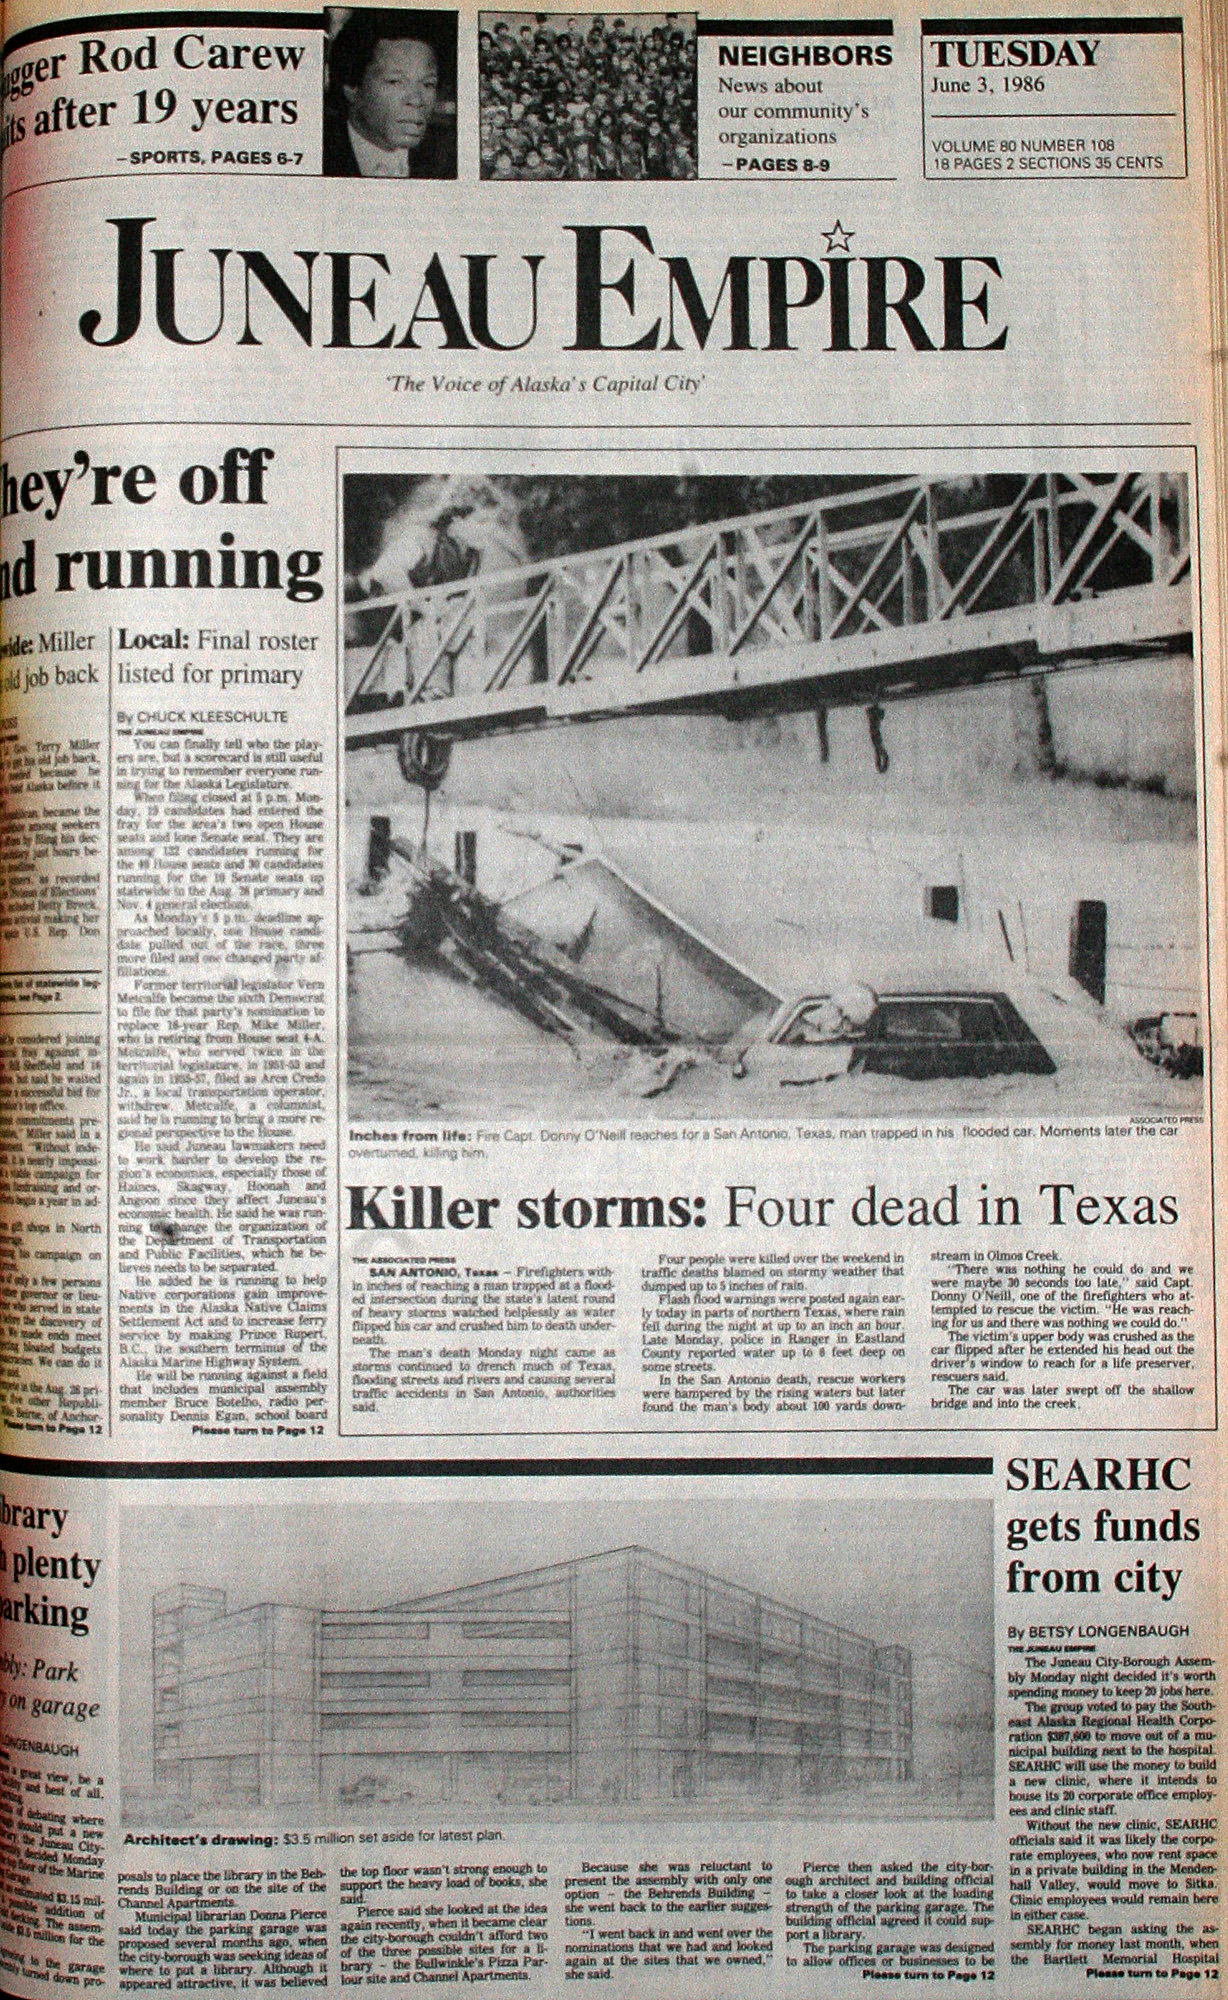 The front page of the Juneau Empire on June 3, 1986